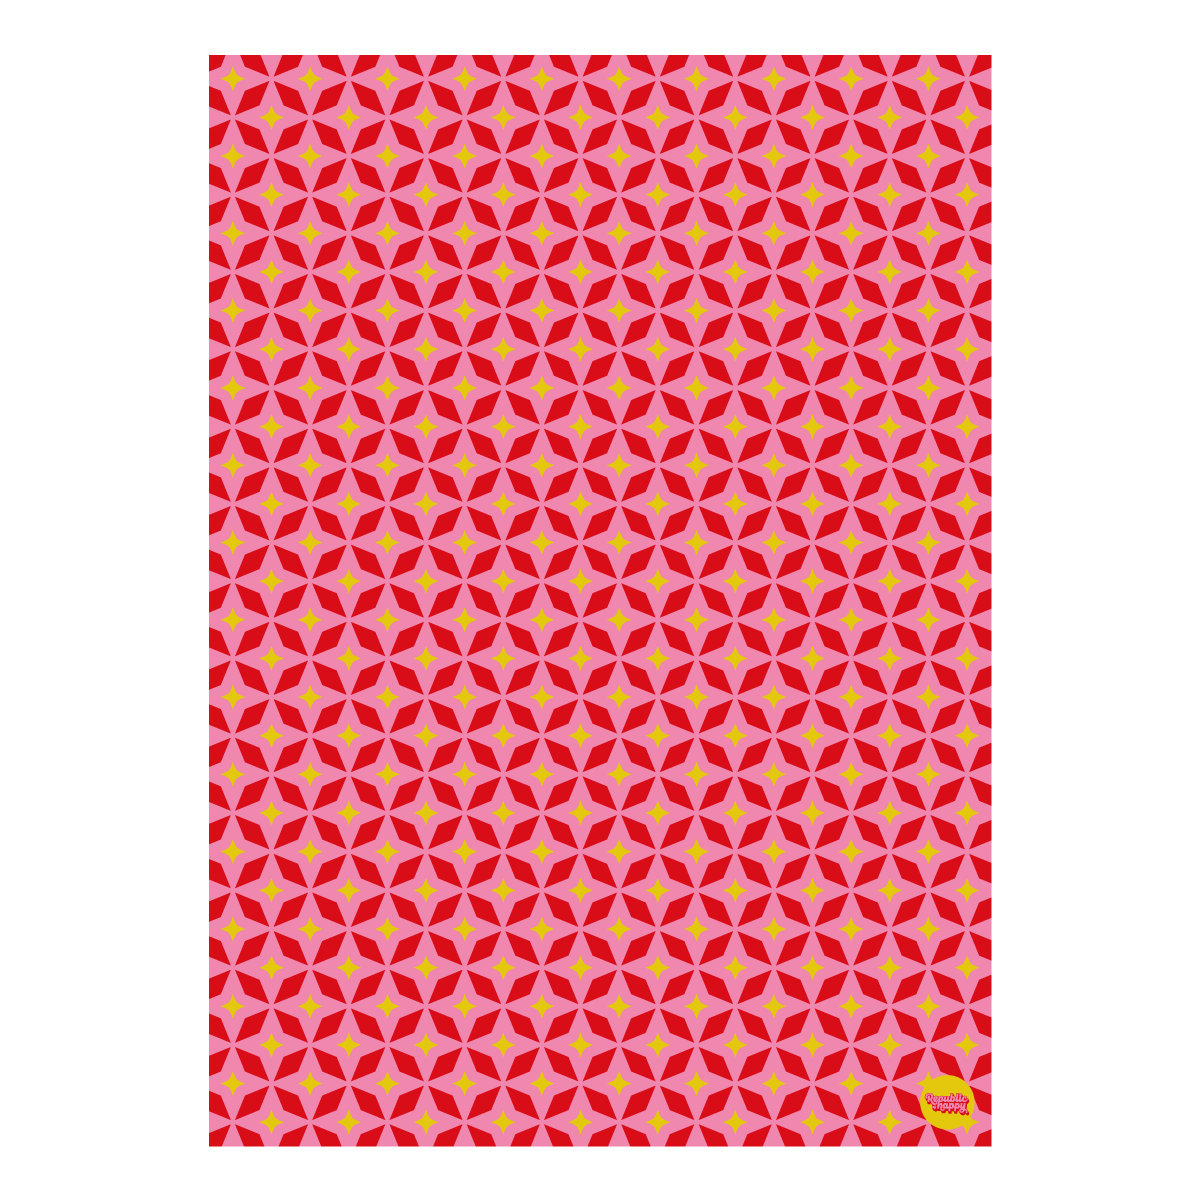 STARS wrapping paper - Colourful gift wrap sheets (3, 6 or 12)